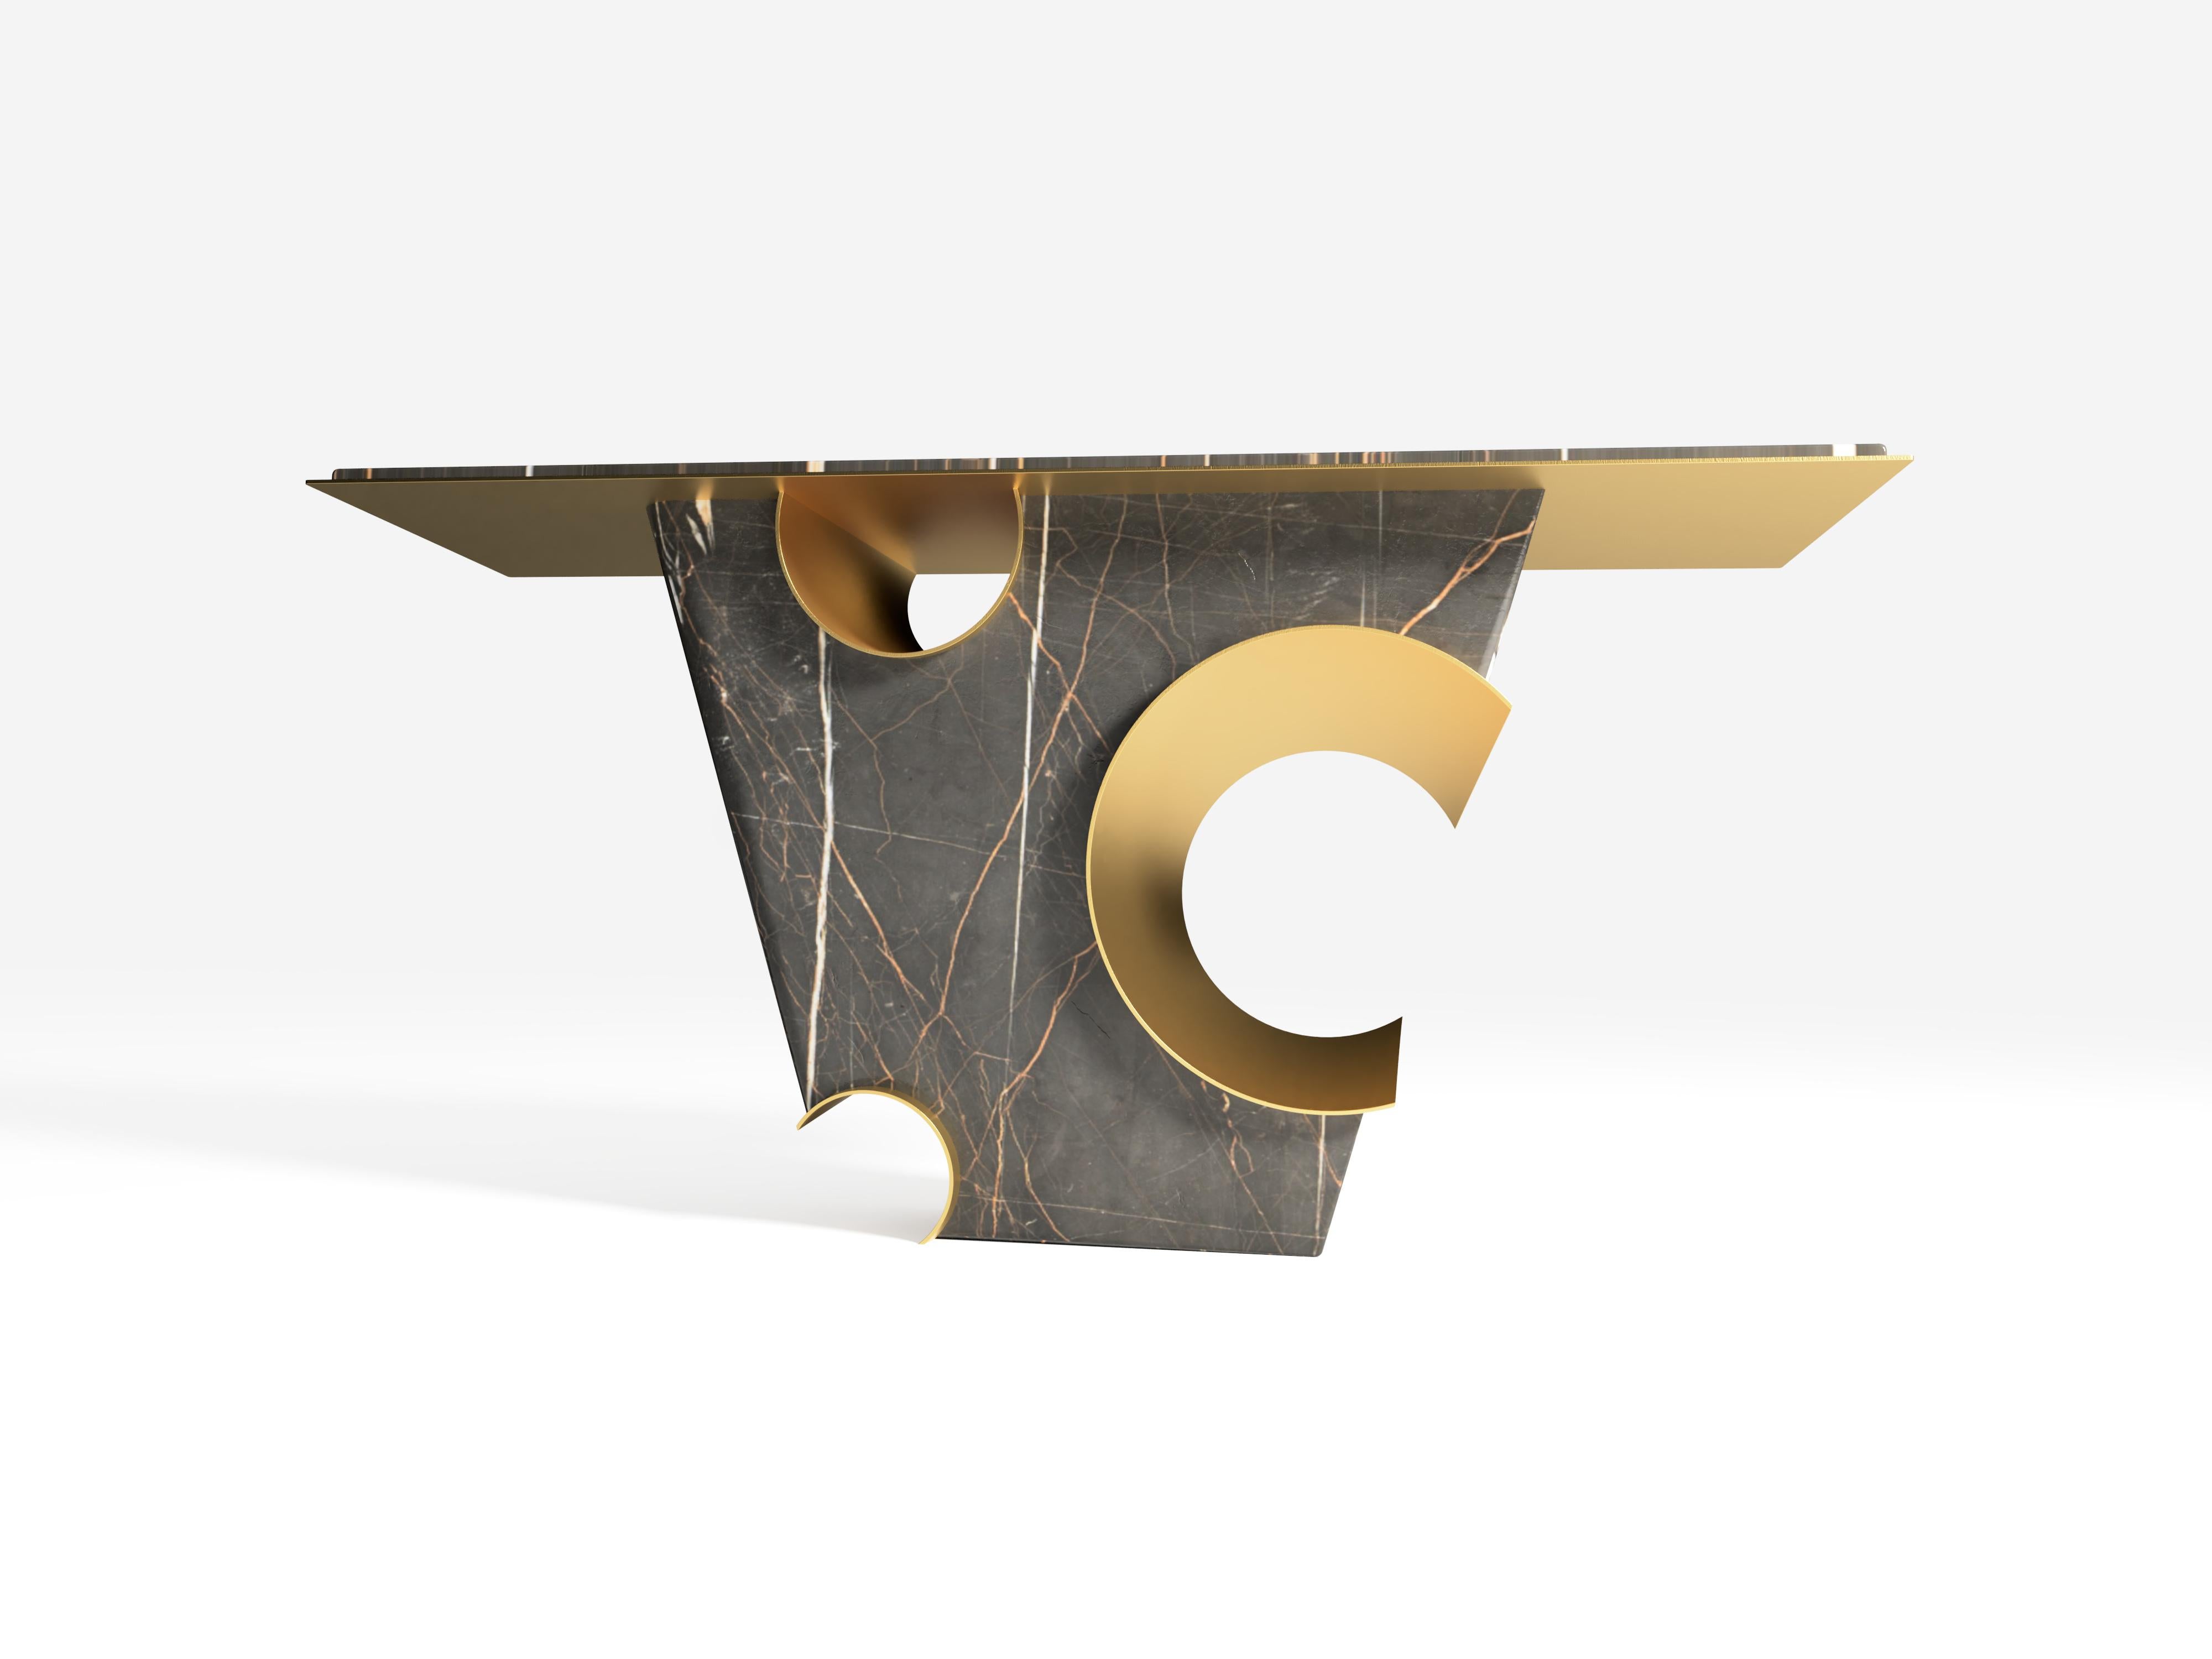 British The Galactic Console Table, 1 of 1 by Grzegorz Majka For Sale